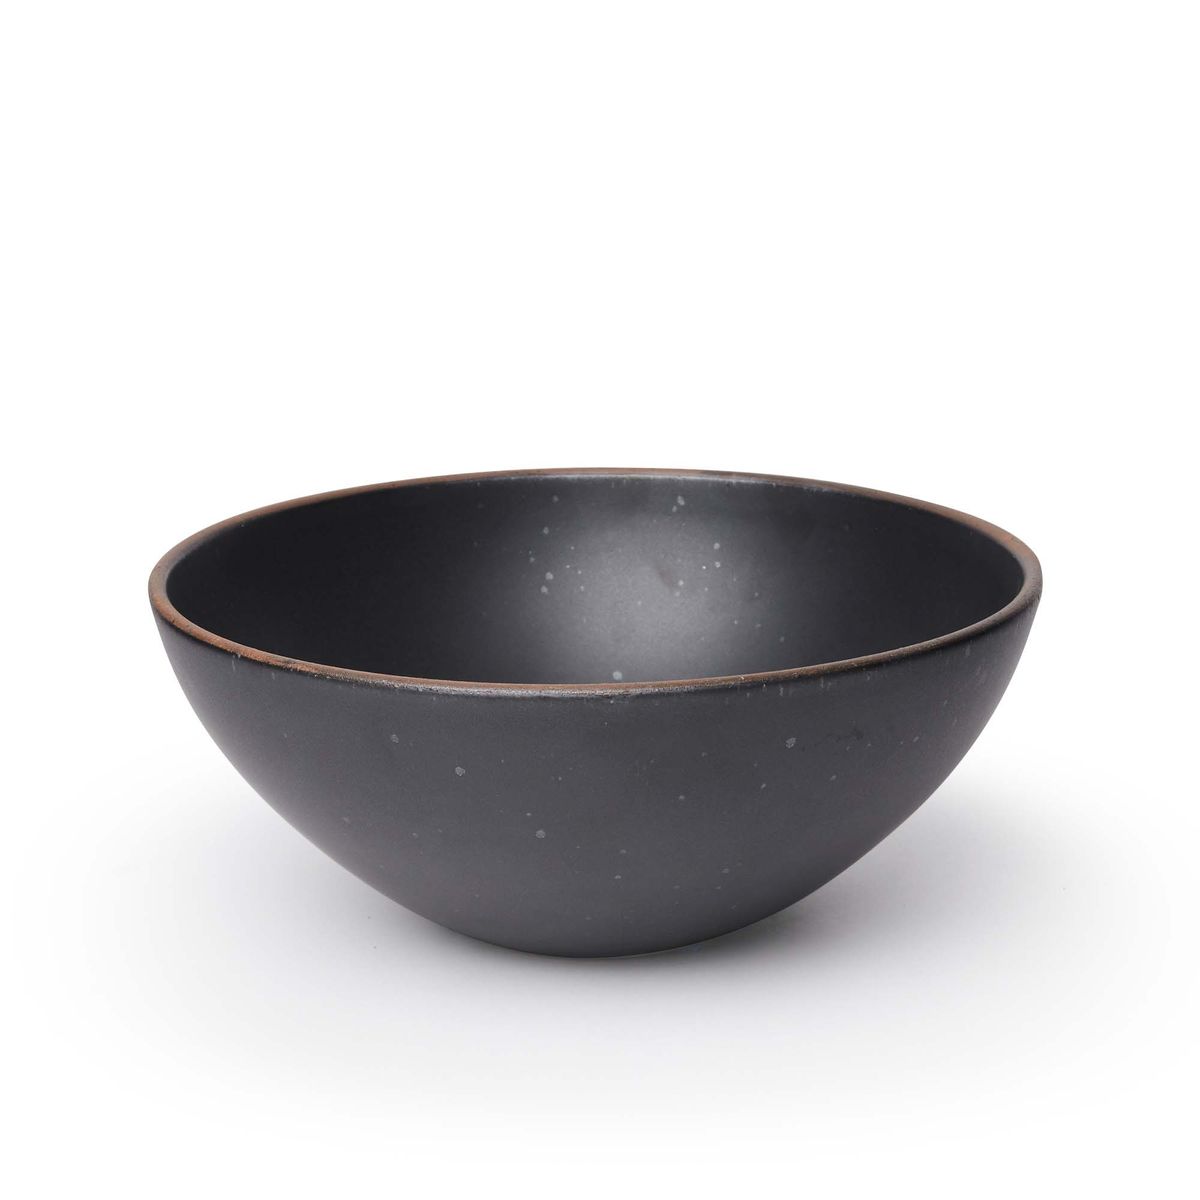 A large ceramic mixing bowl in a graphite black color featuring iron speckles and an unglazed rim